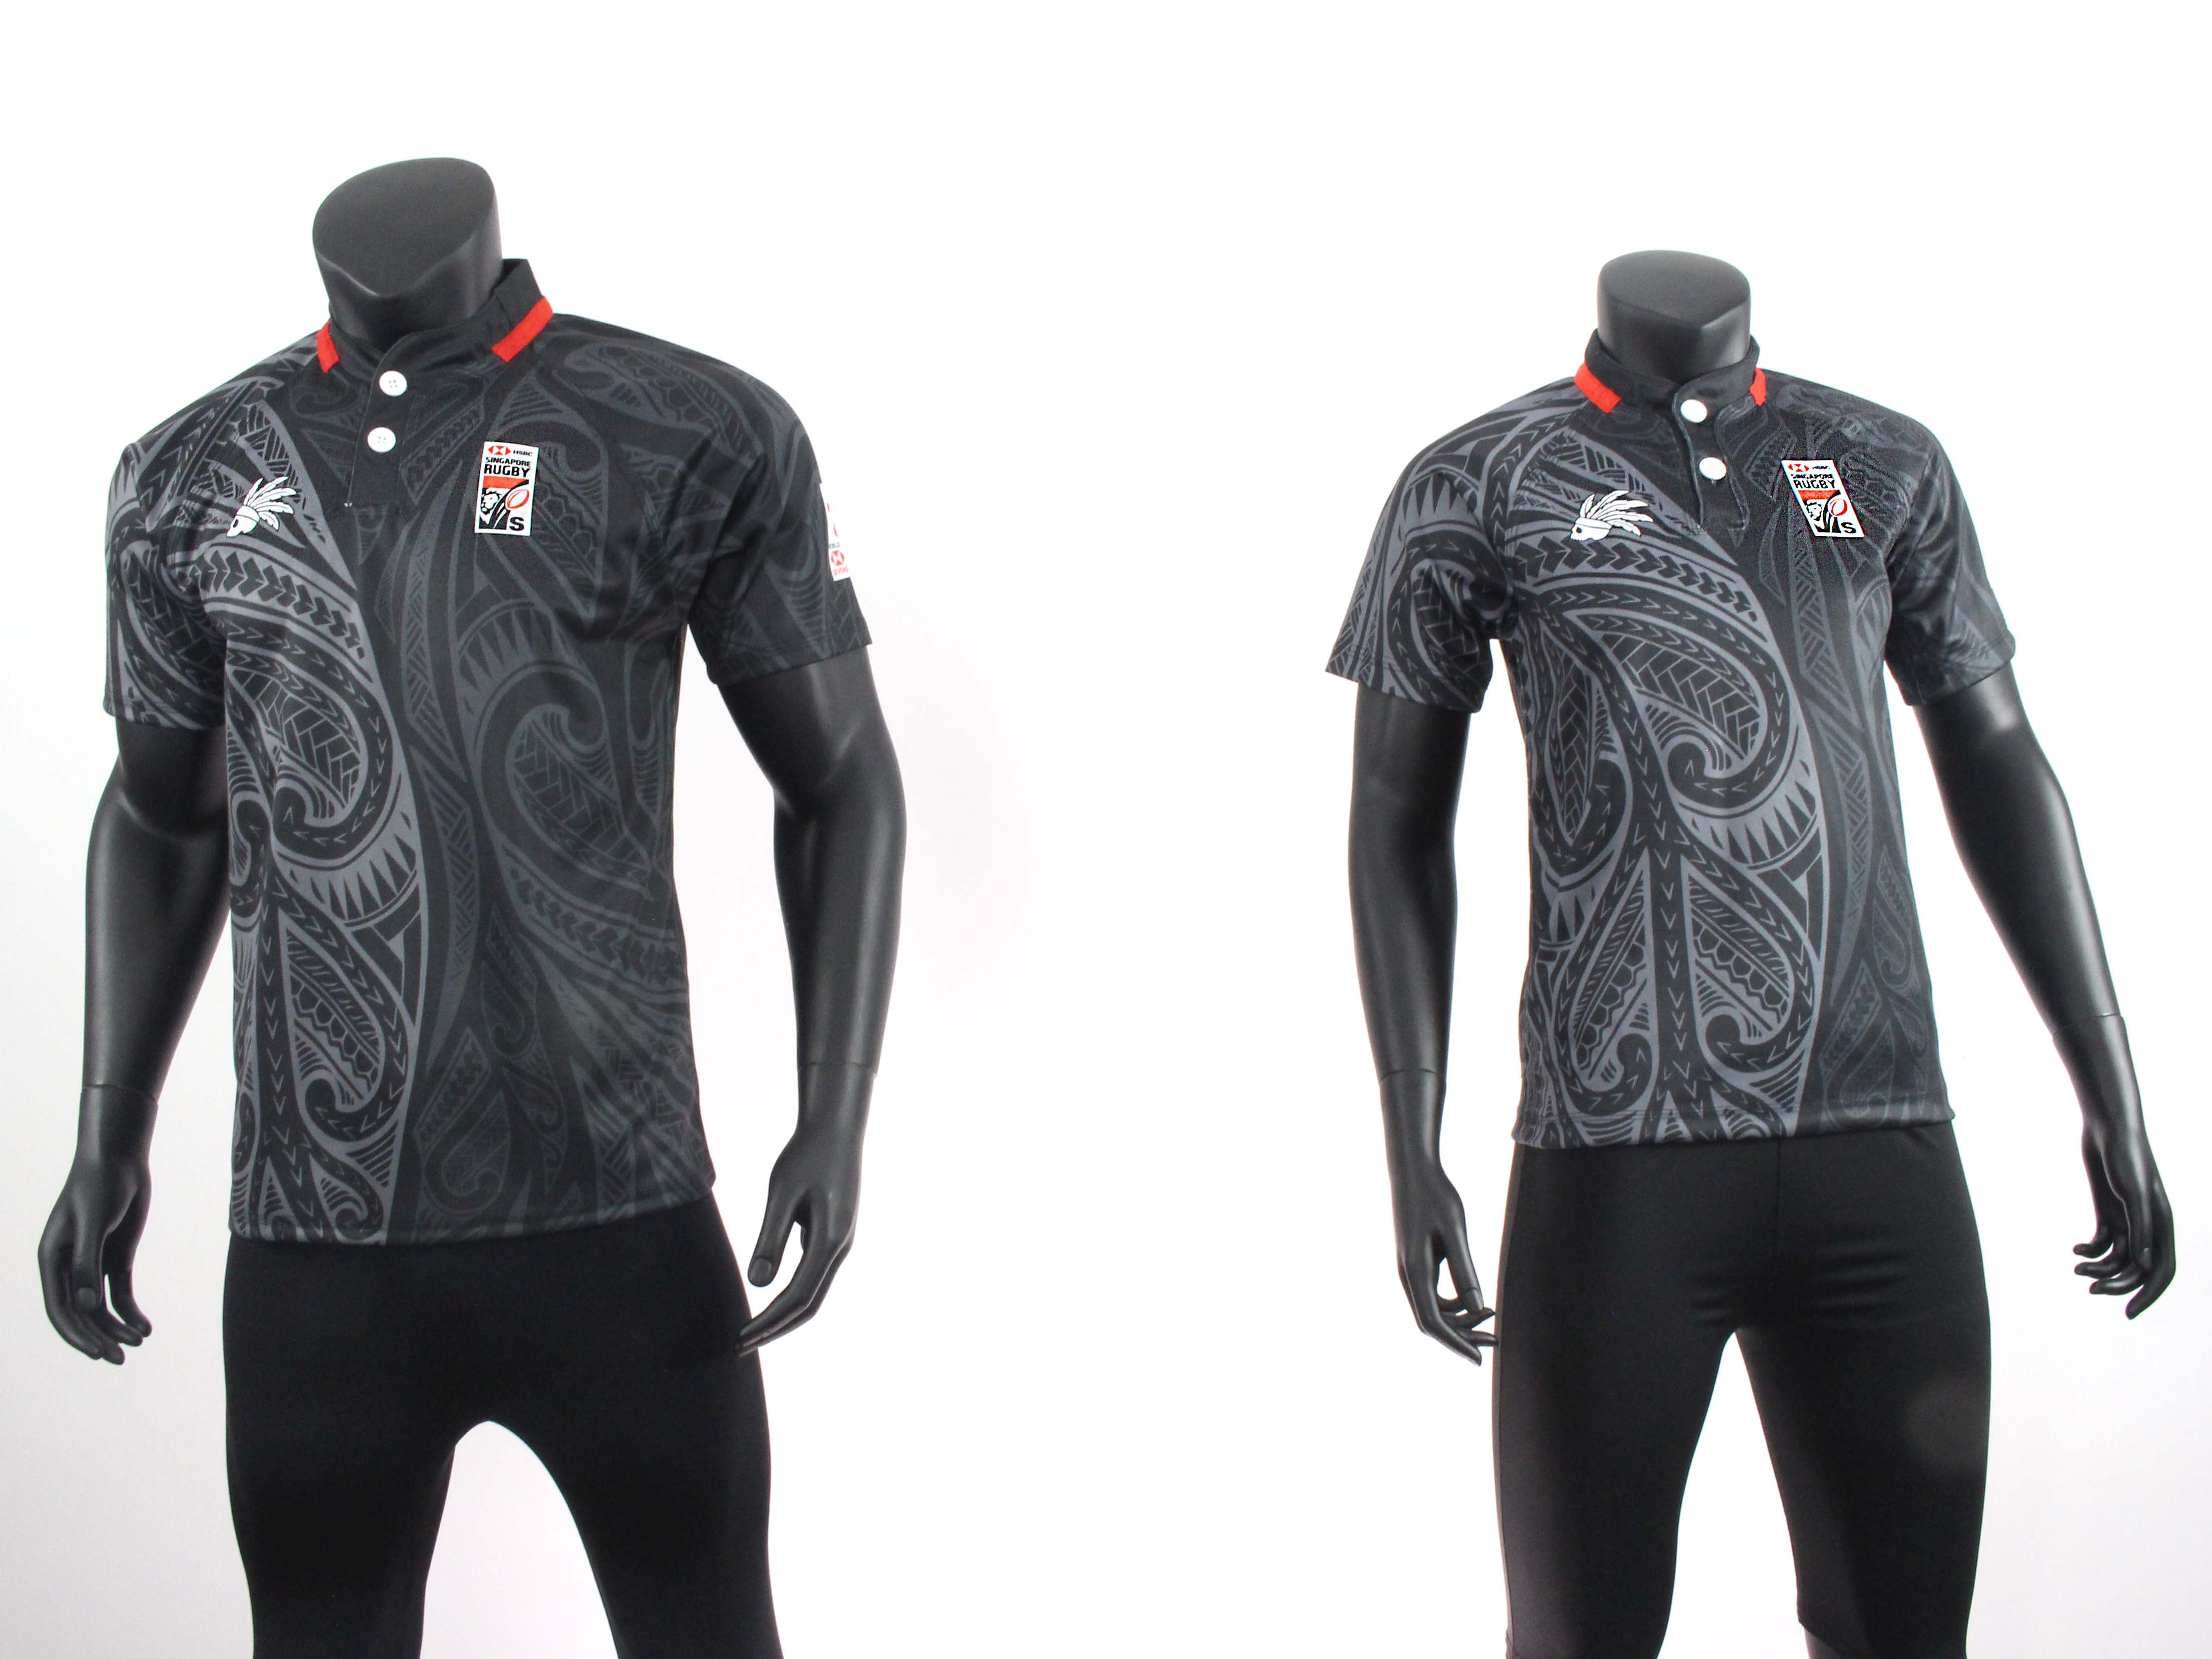 NEW ZEALAND RUGBY JERSEY